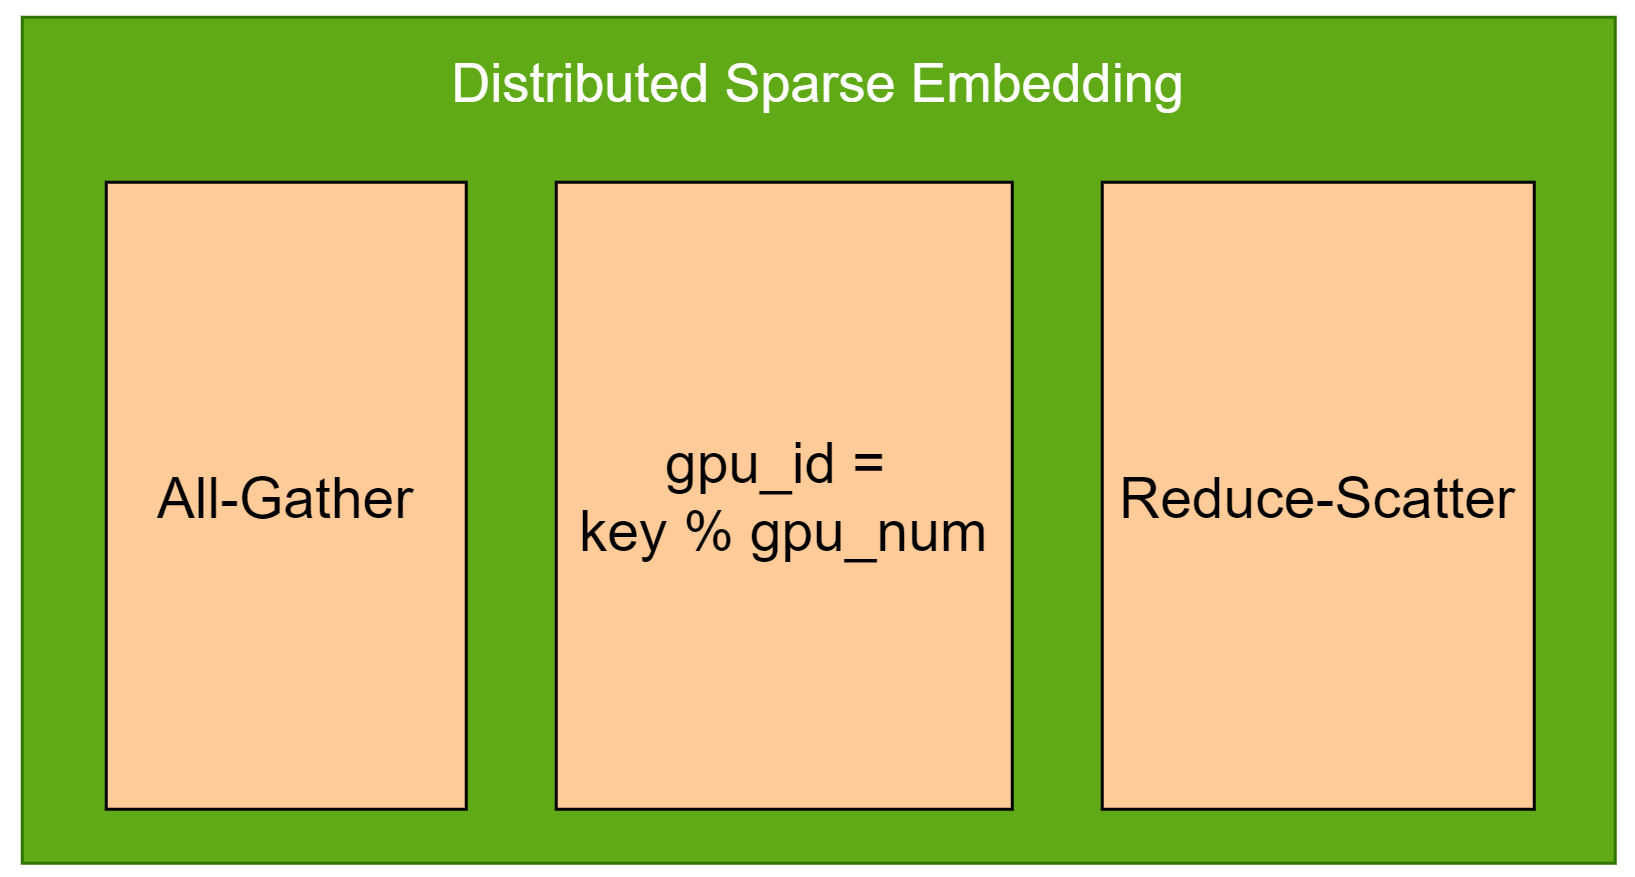 ../_images/distributed_sparse_embedding.png